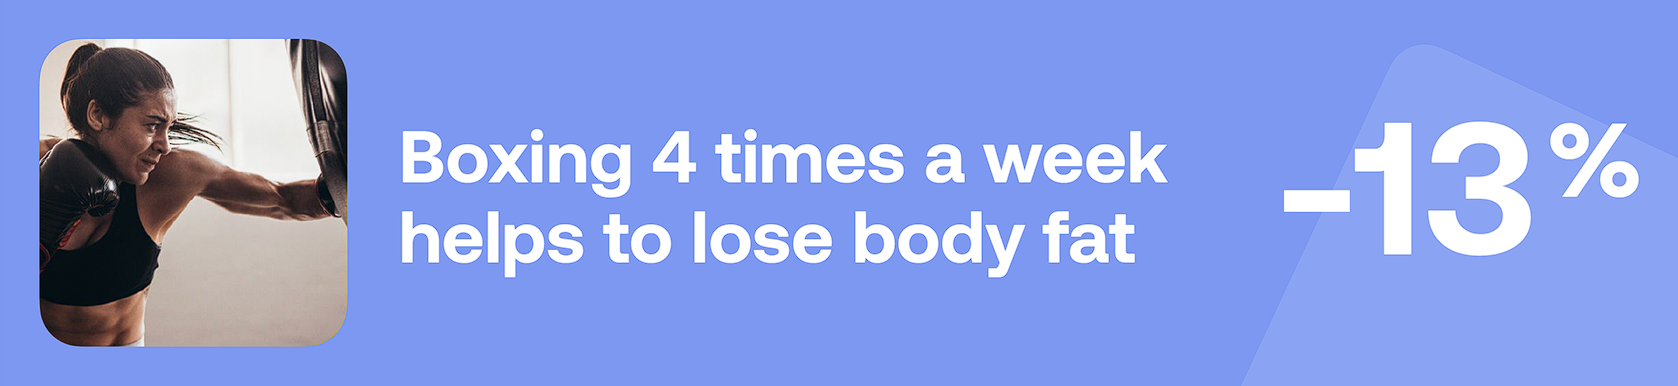 Boxing 4 times a week helps to lose body fat -13%